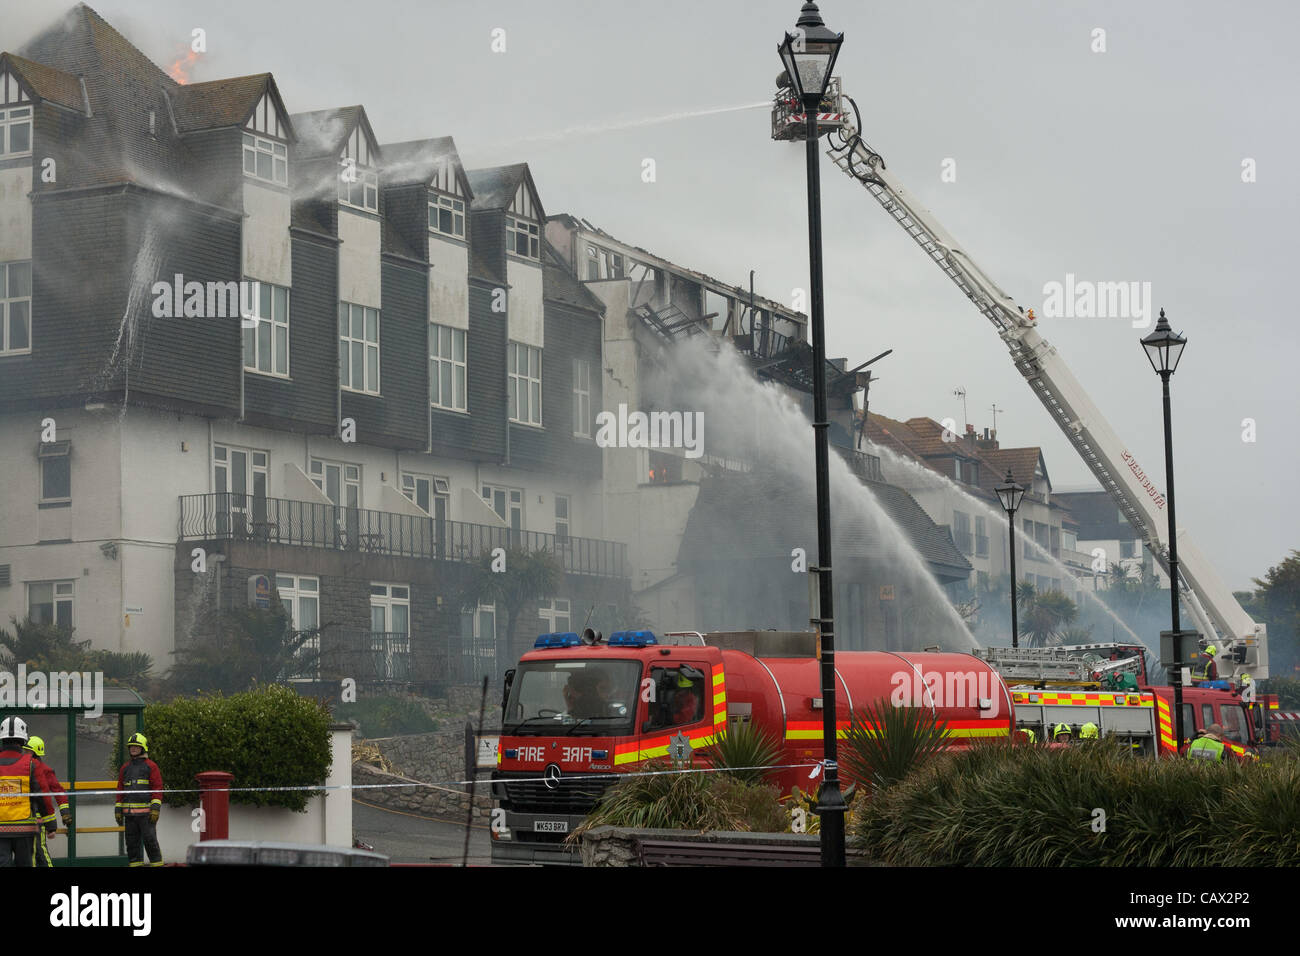 Fire at Falmouth's Beach hotel destroys much of the building and its content on April 30th 2012. Stock Photo